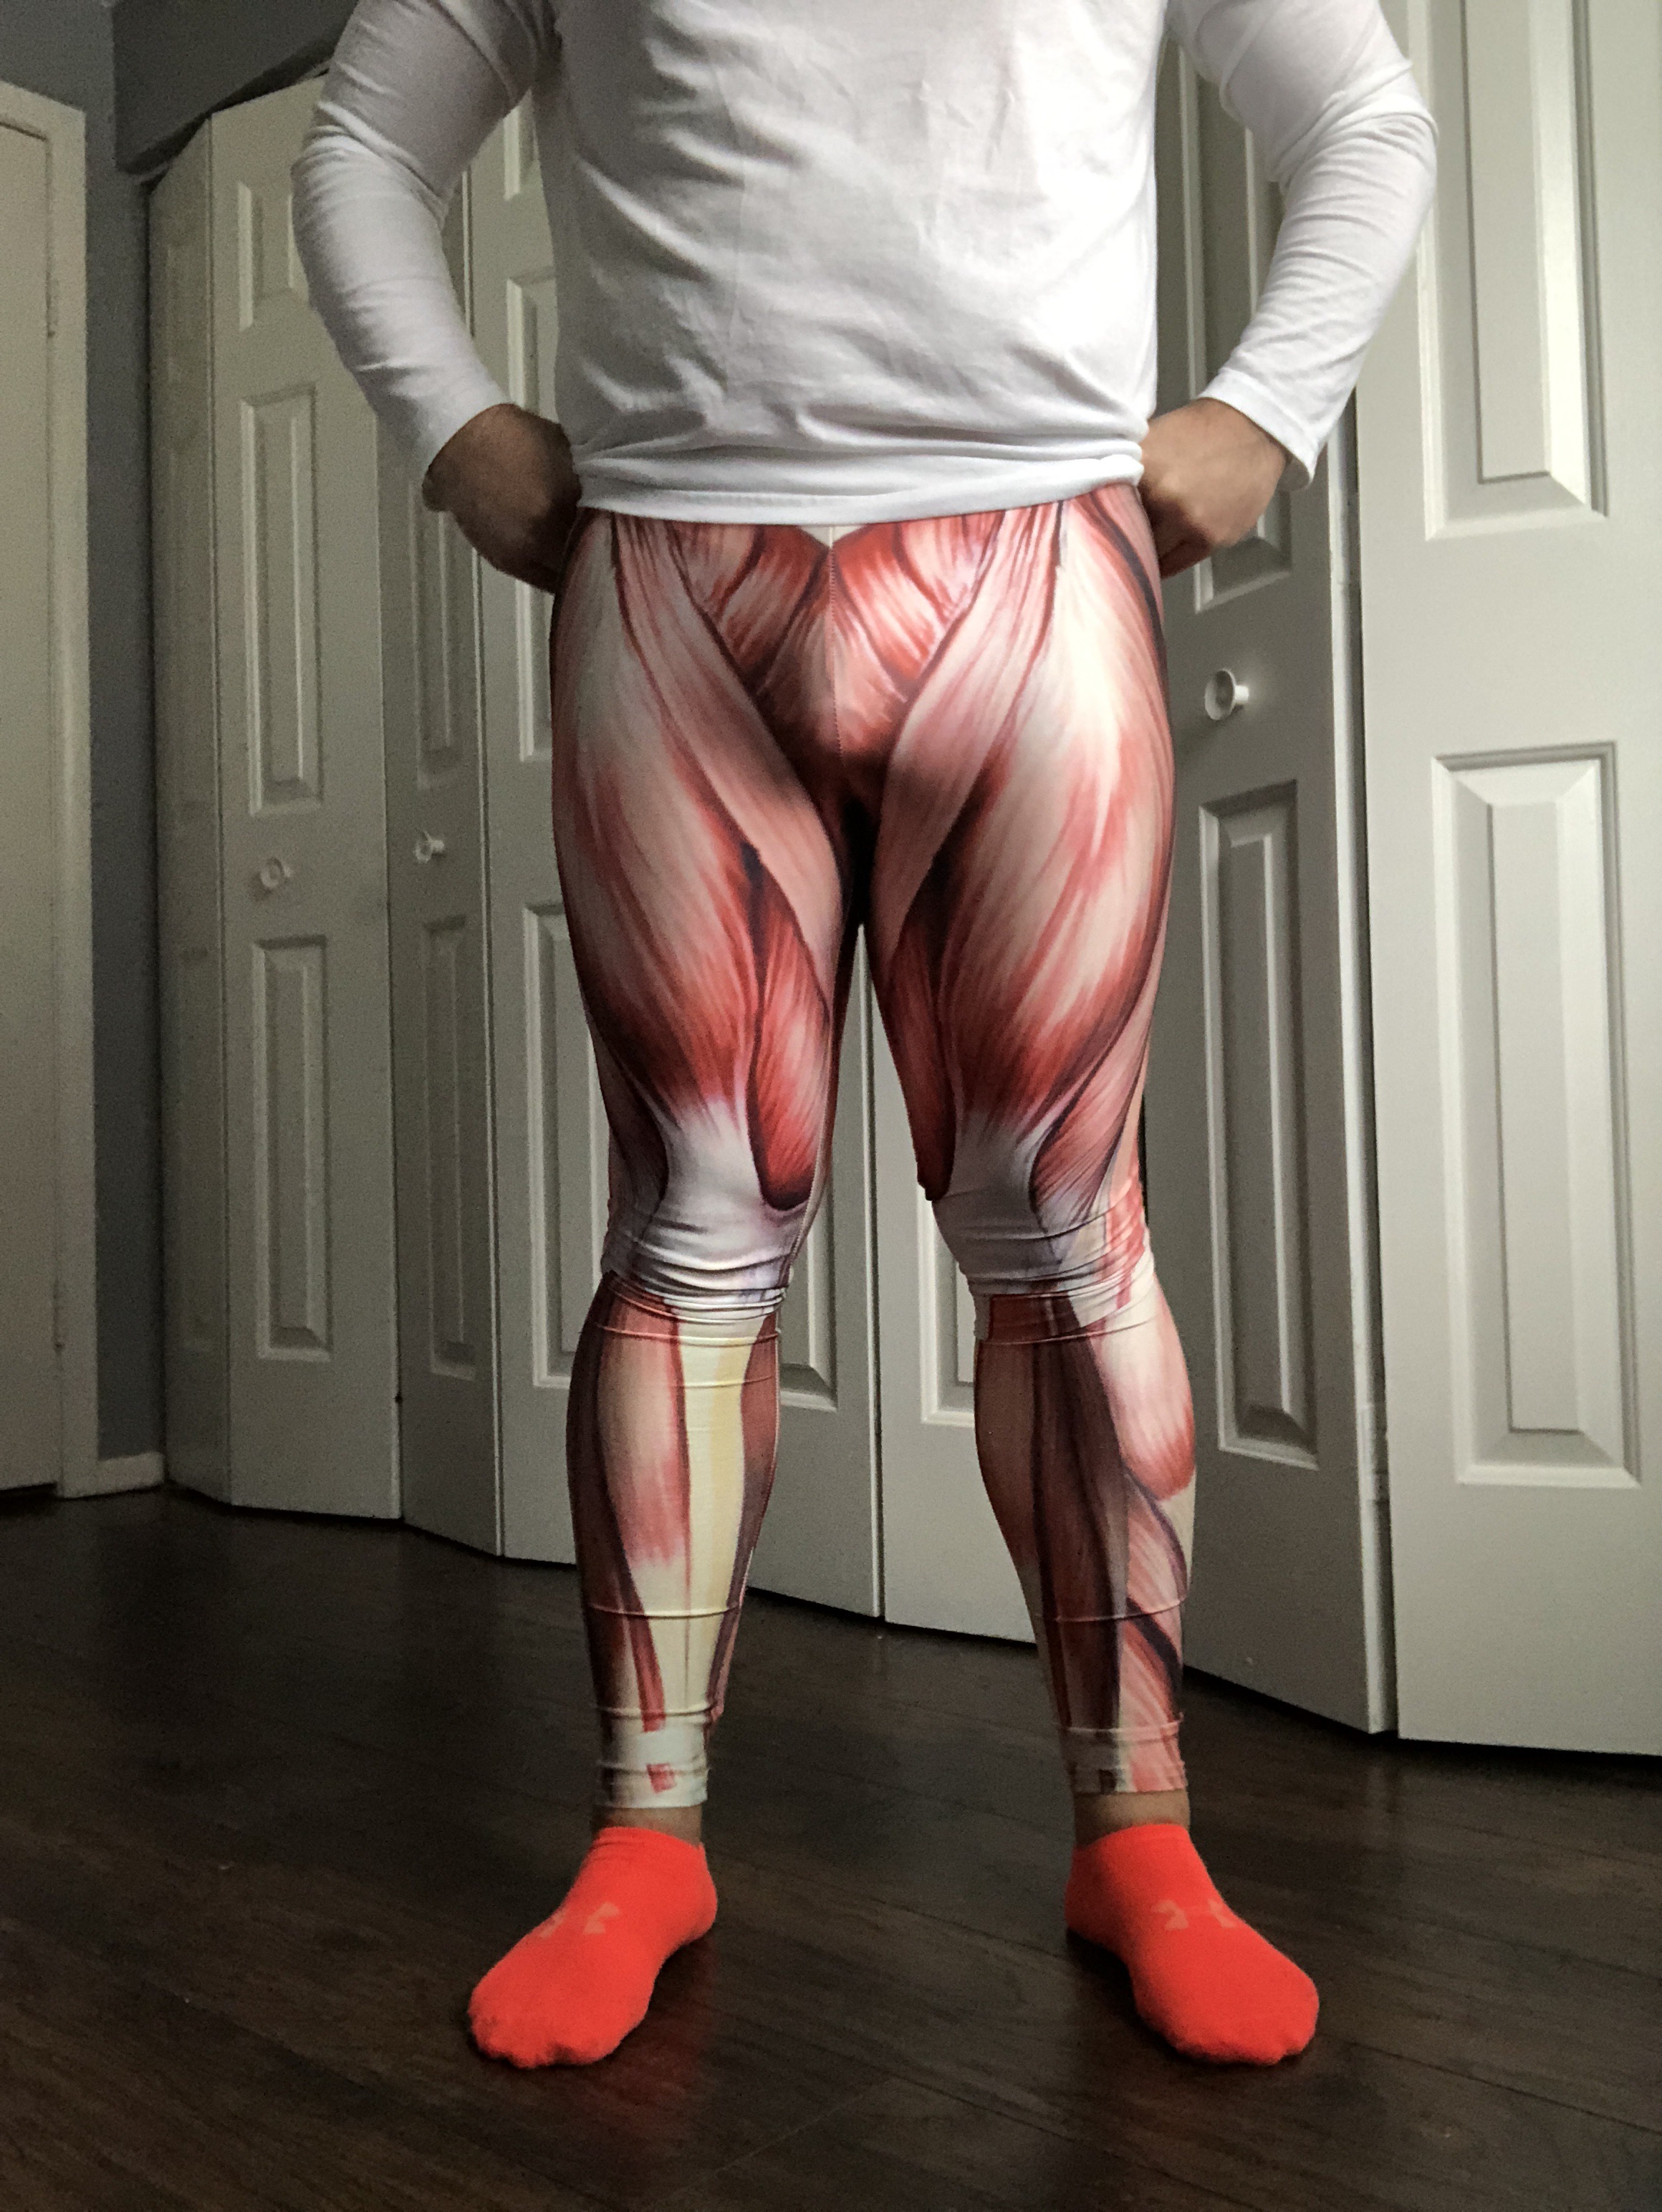 Muscles and Leggings and bloggers – oh my!